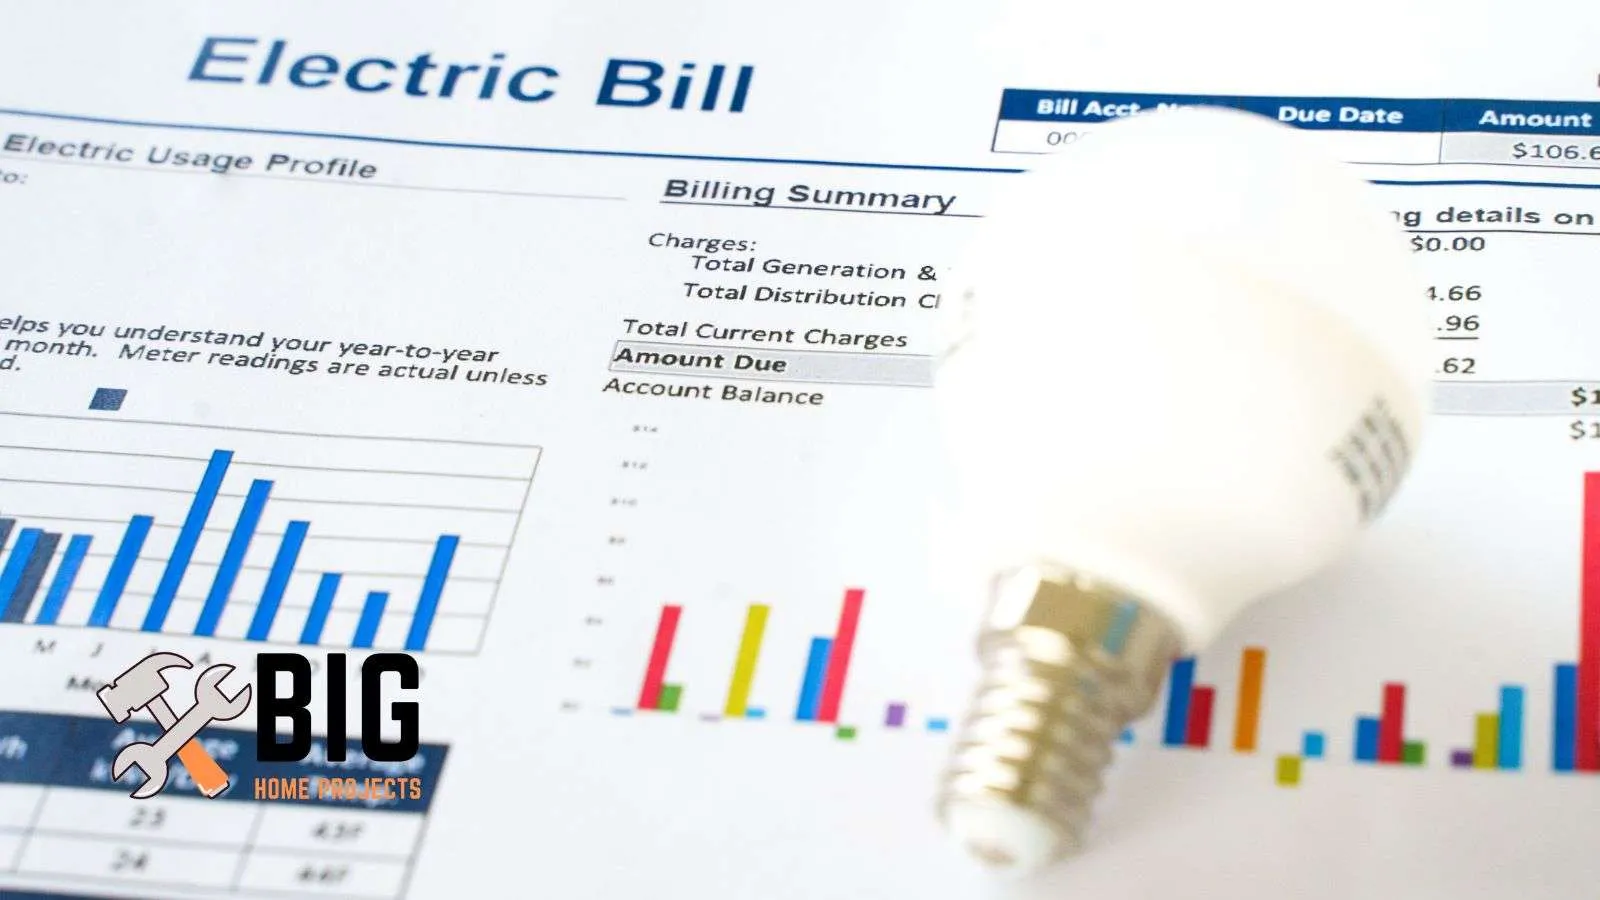 Electric bill being really high thanks to habits - bighomeprojects.com